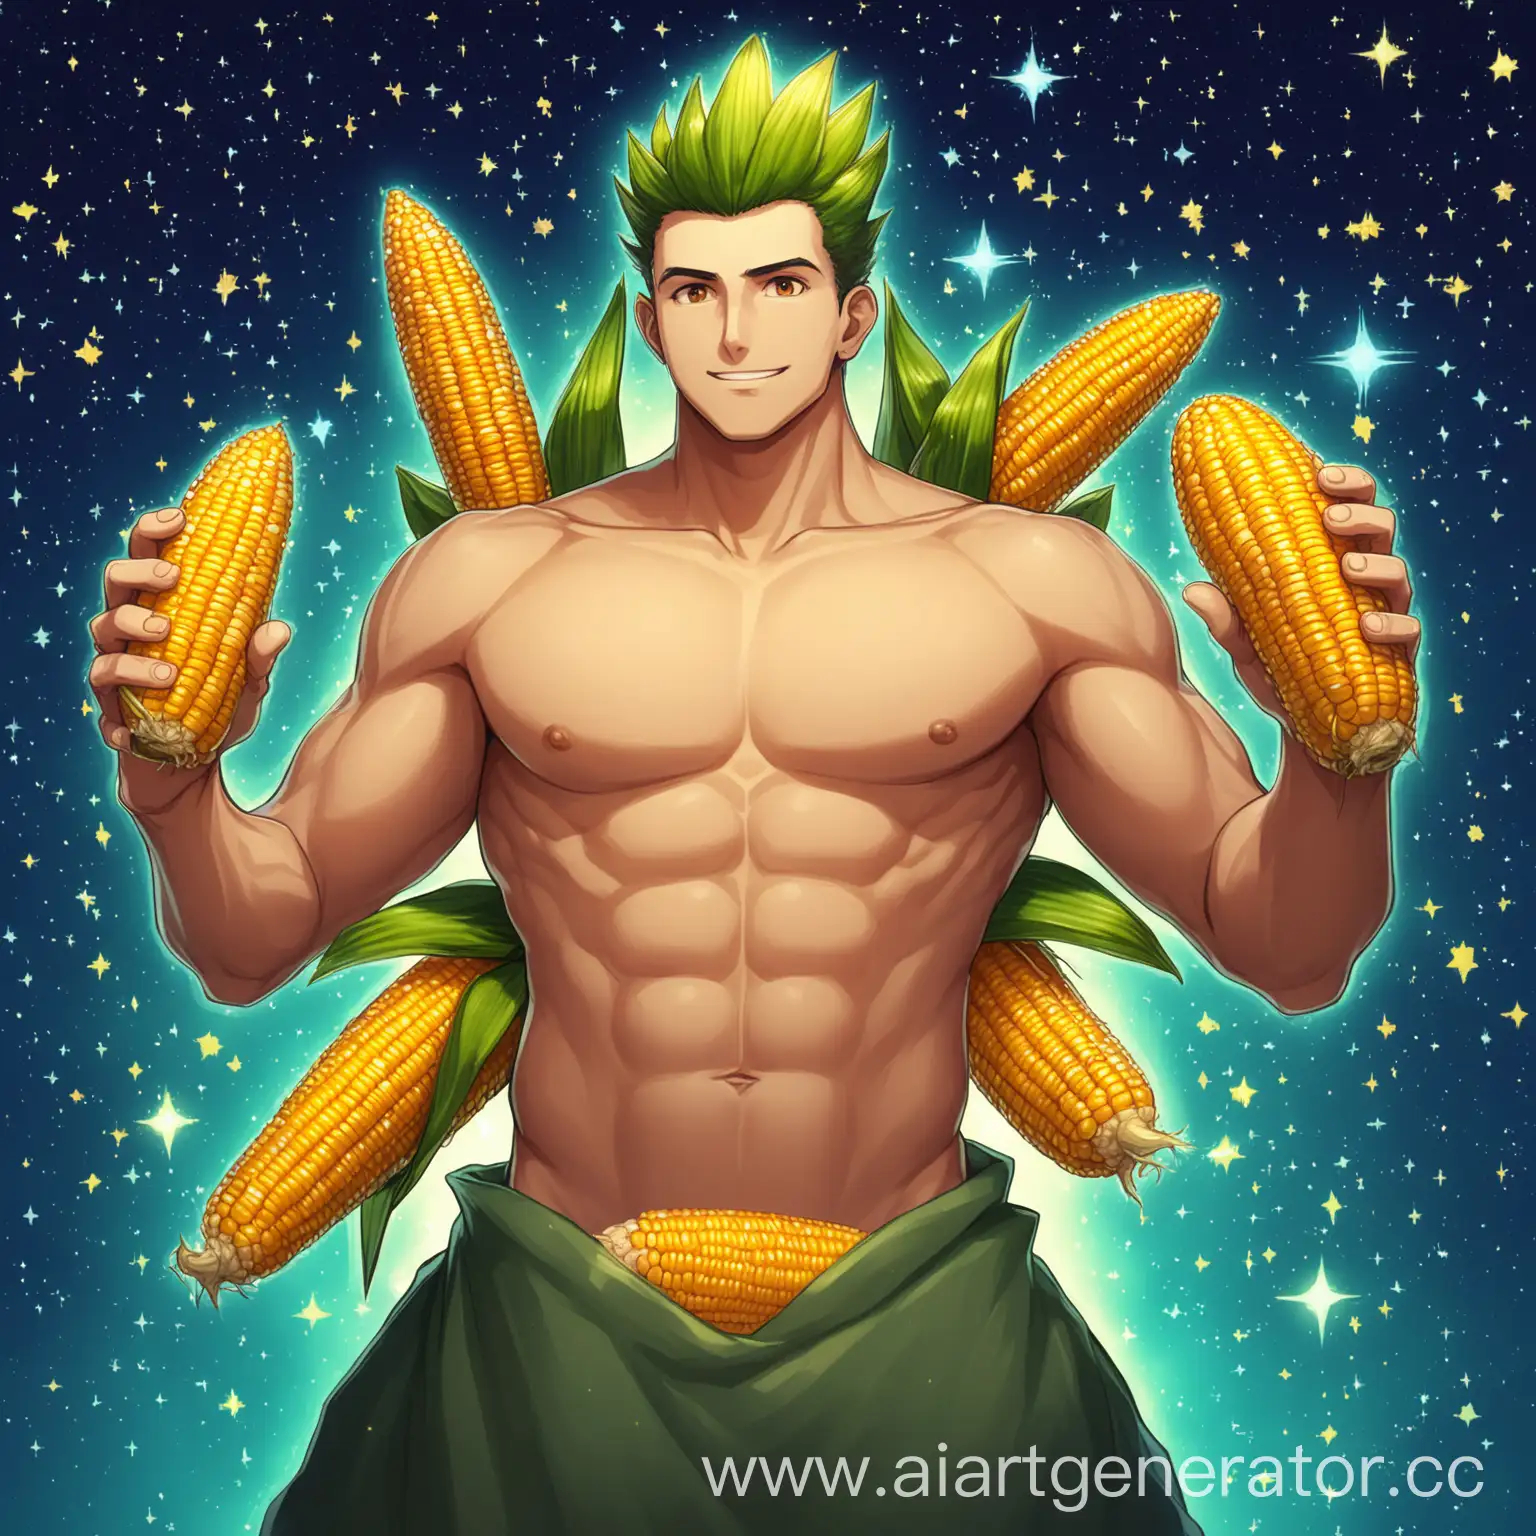 Muscular-Man-Playing-Brawl-Stars-with-Corn-in-Hands